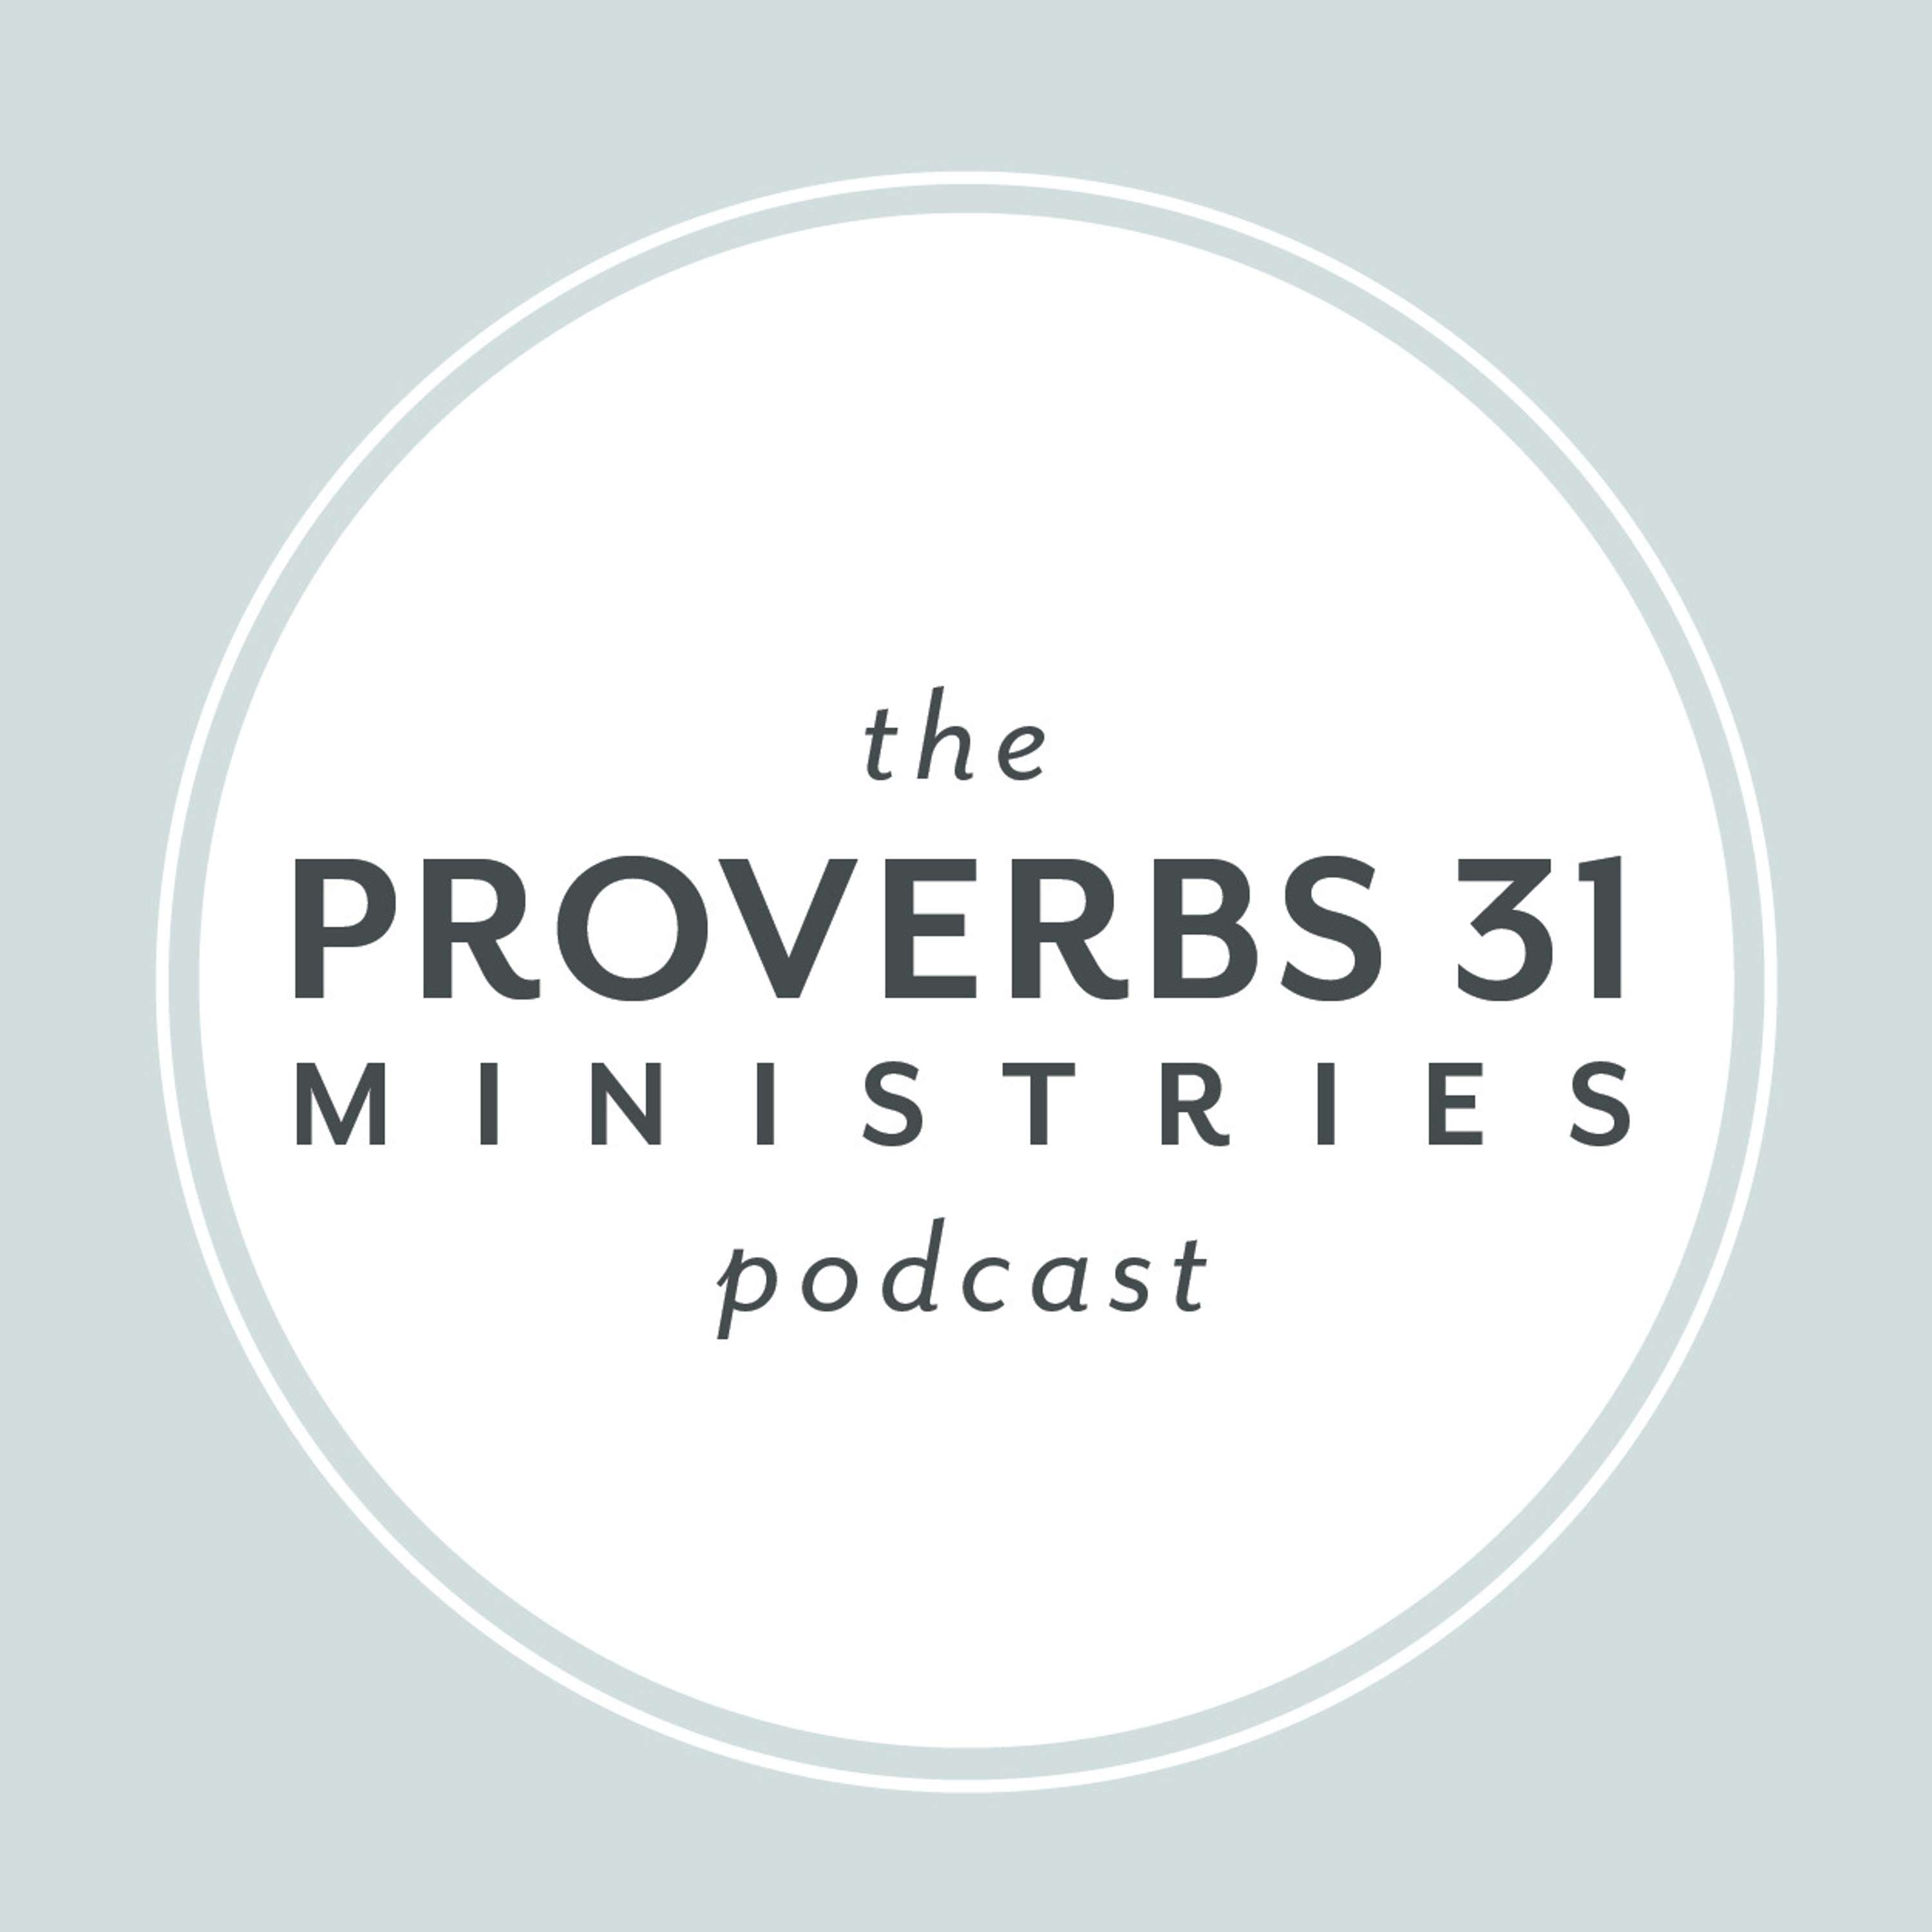 ”Answers to Your 2 Biggest Questions About Prayer” With Wendy Blight